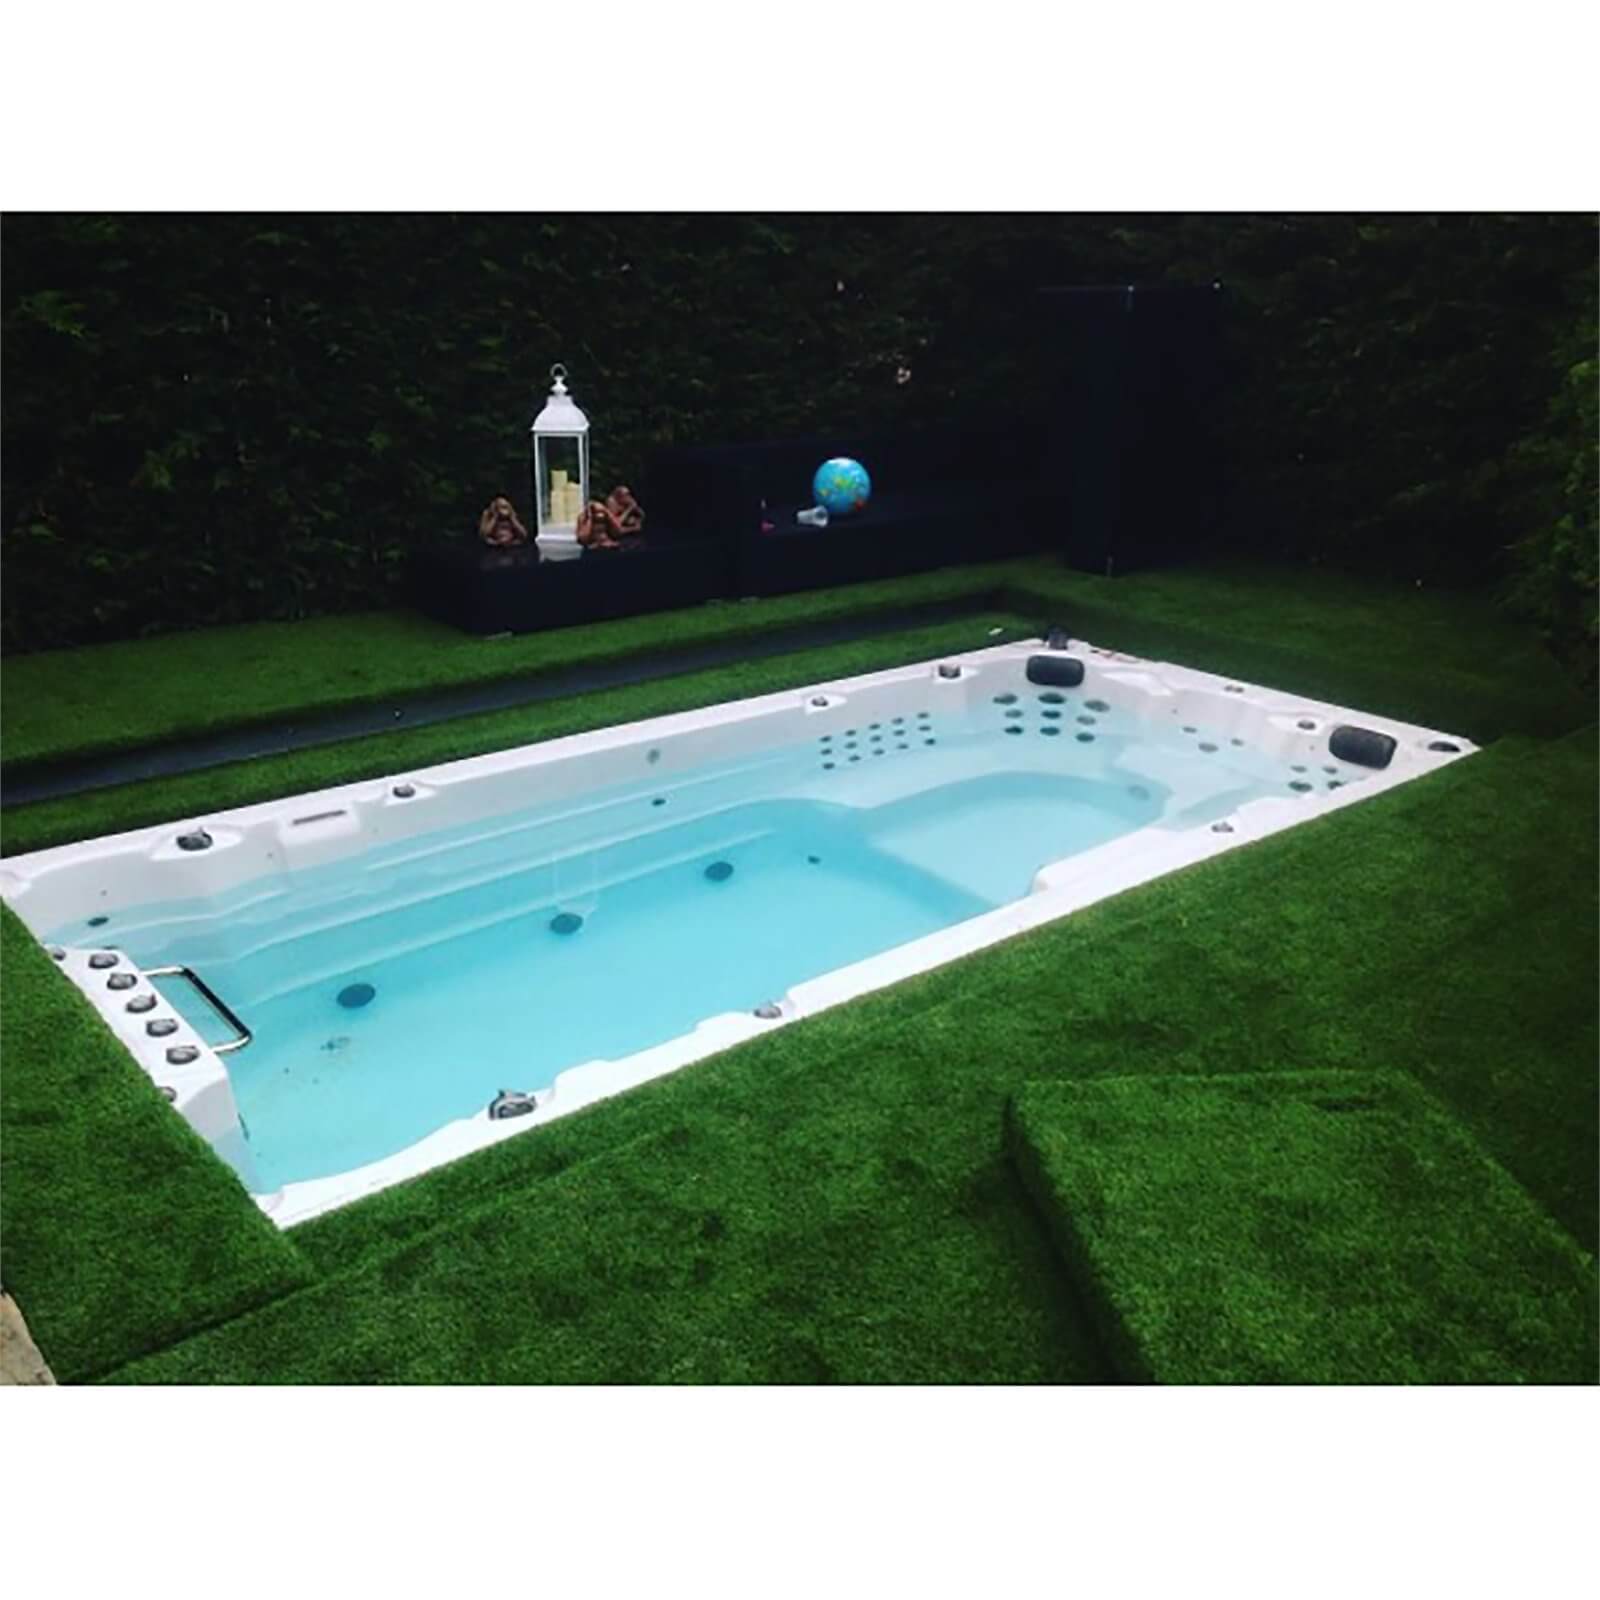 Canadian Spa 16ft Swim Spa St. Lawrence (Includes Free Delivery & Installation)